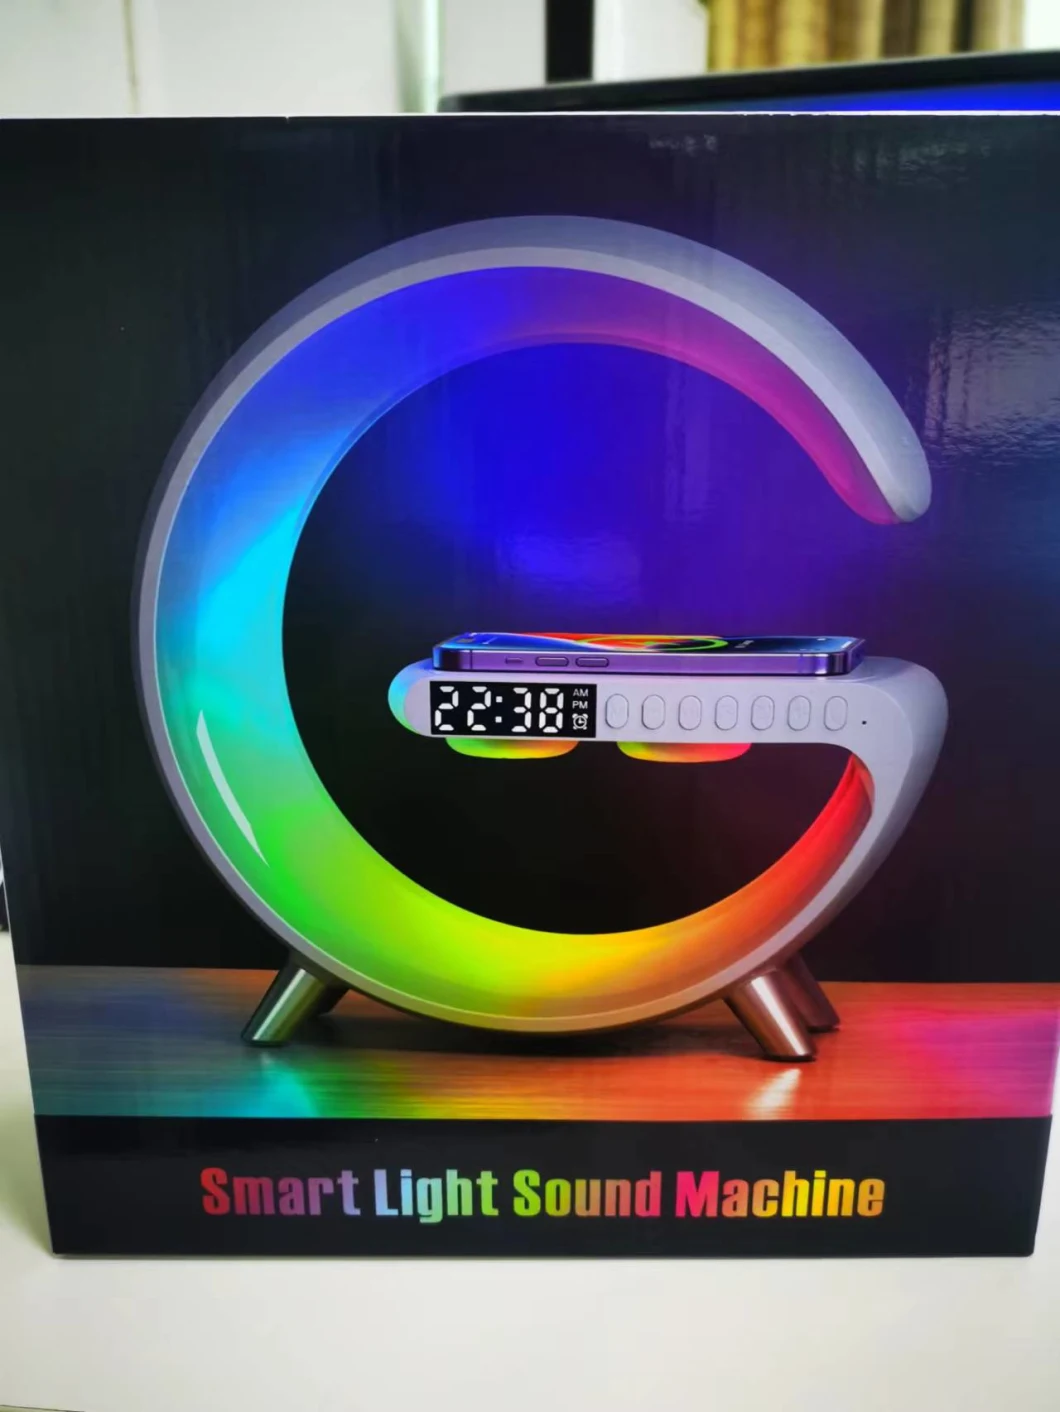 2022 Most Popular LED Desk Lamp Table Lamp New Design Alarm Clock FM Radio Blue Tooth Speaker with Microphone Smart Light Sound Machine Wireless Charger